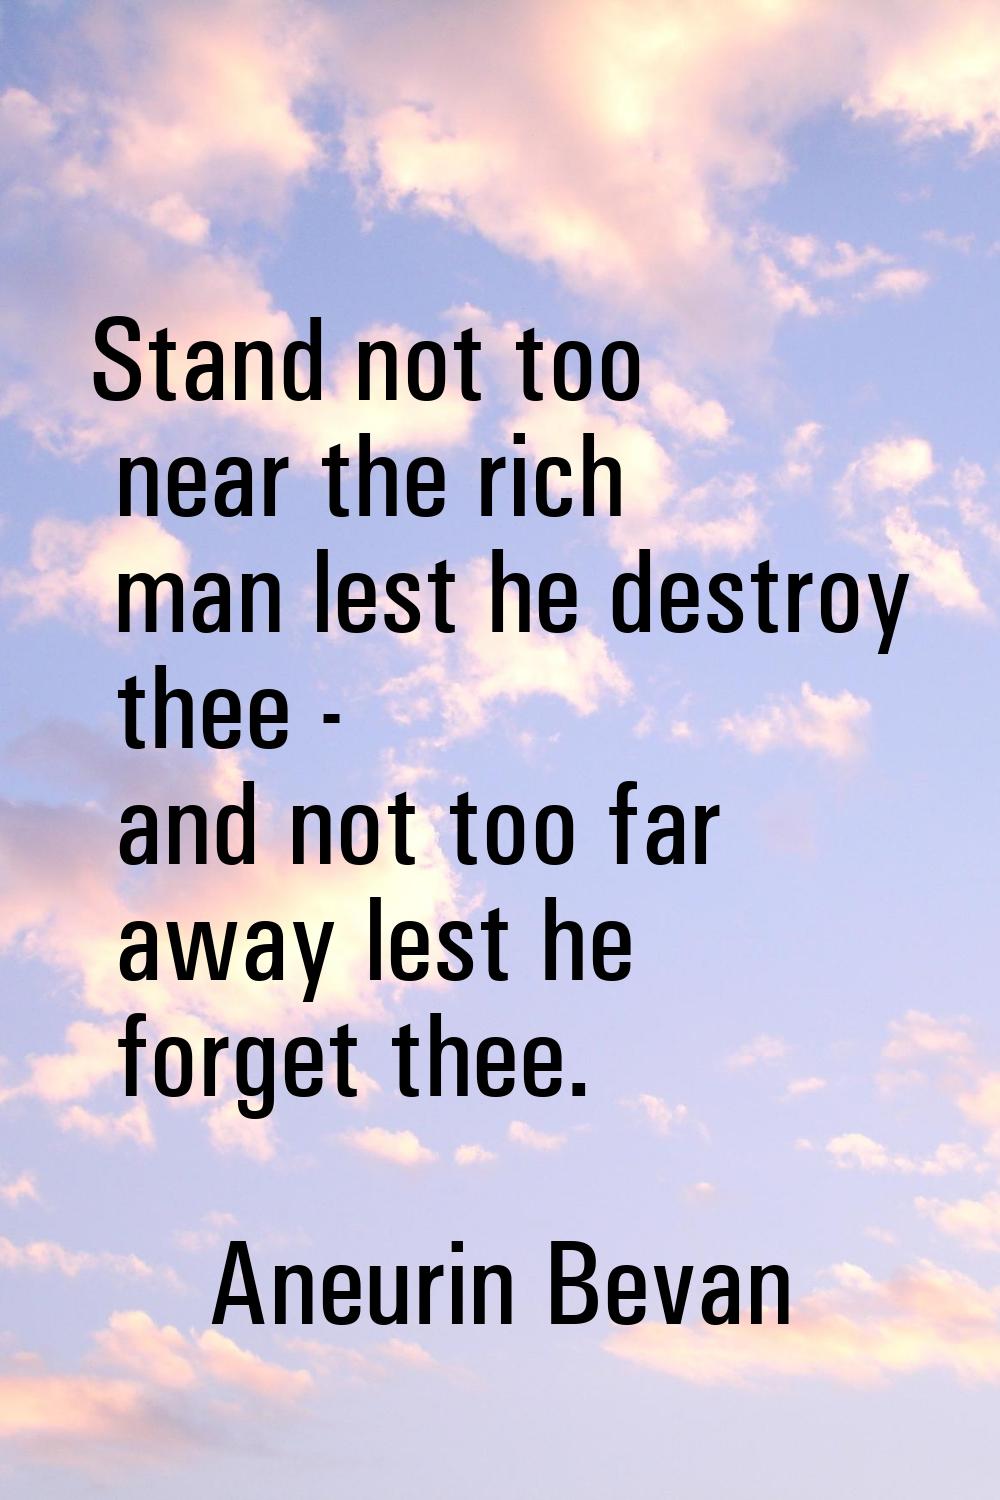 Stand not too near the rich man lest he destroy thee - and not too far away lest he forget thee.